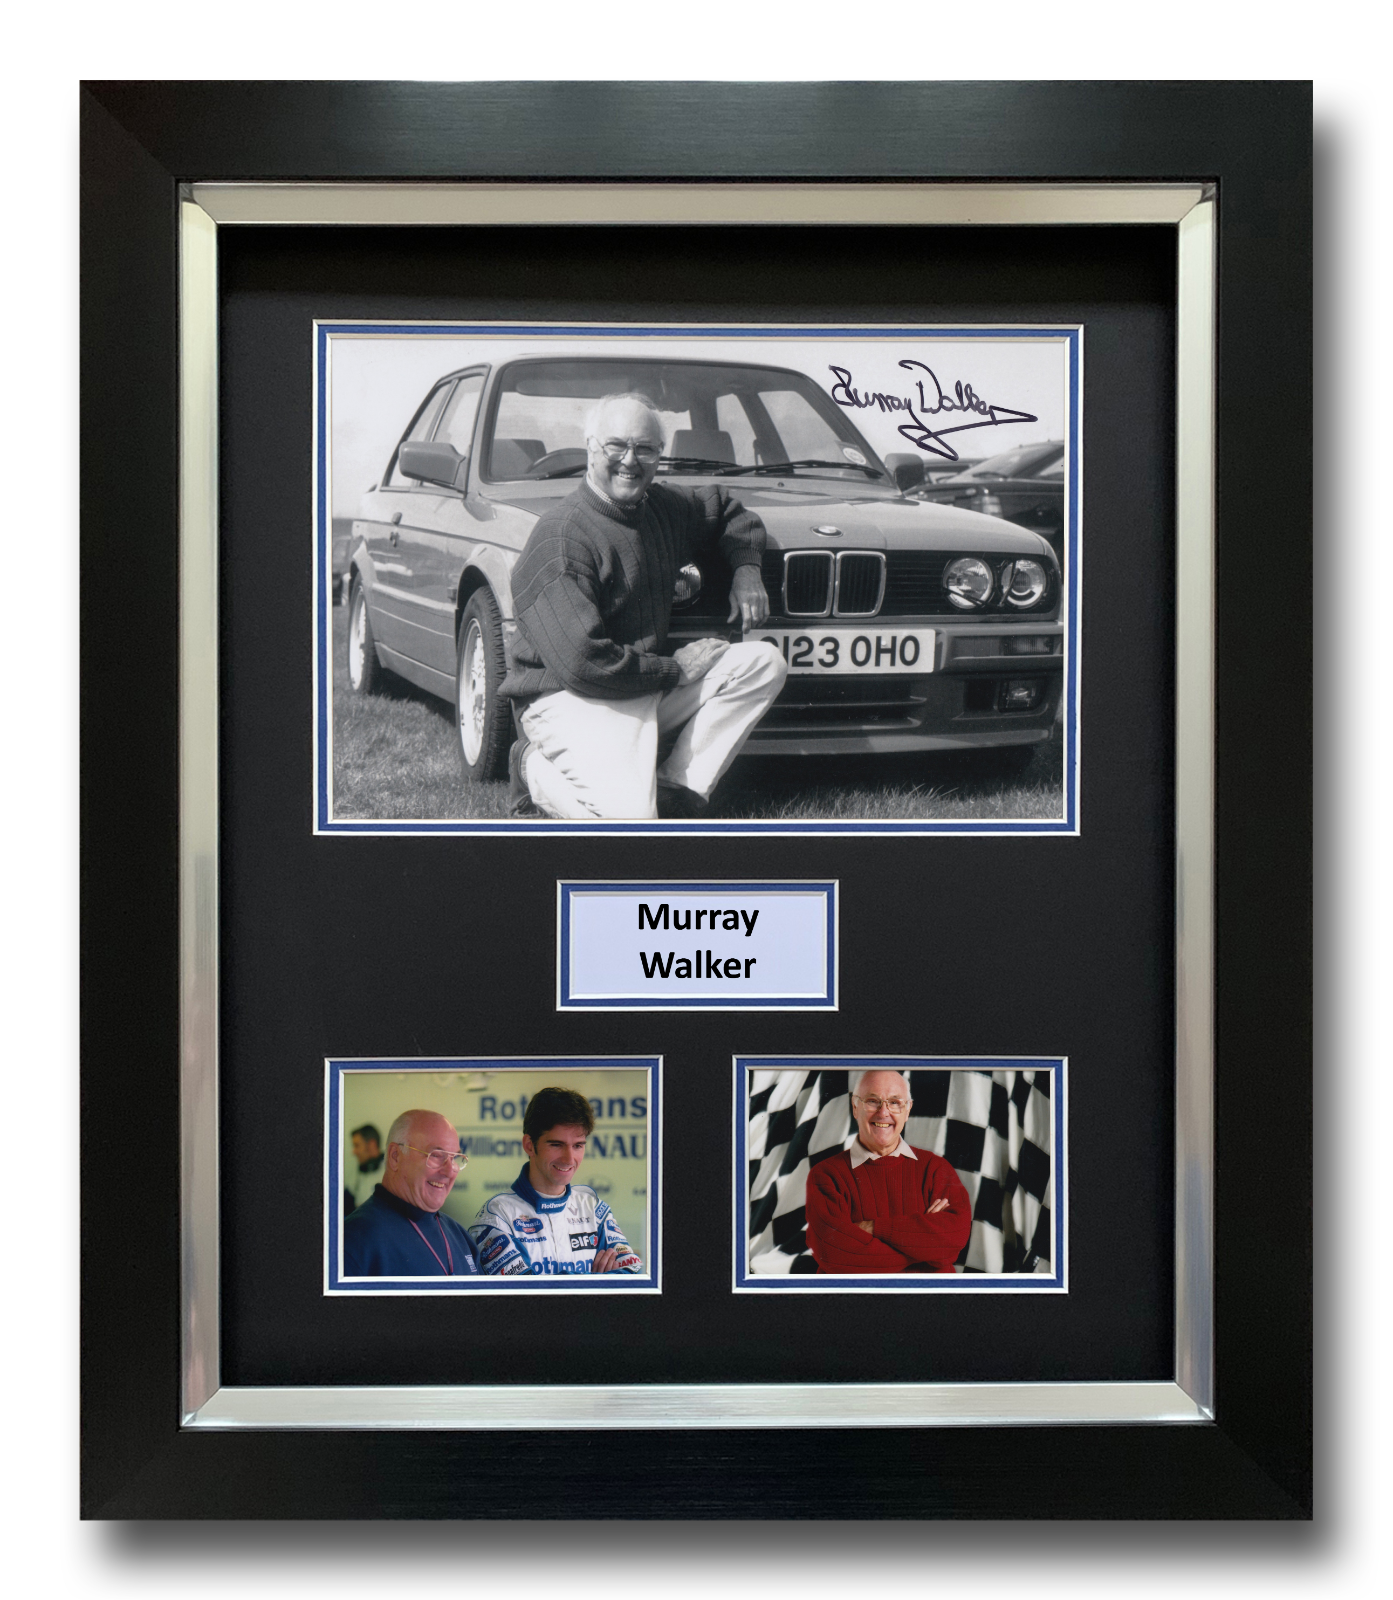 MURRAY WALKER HAND SIGNED FRAMED Photo Poster painting DISPLAY - FORMULA 1 AUTOGRAPH F1.